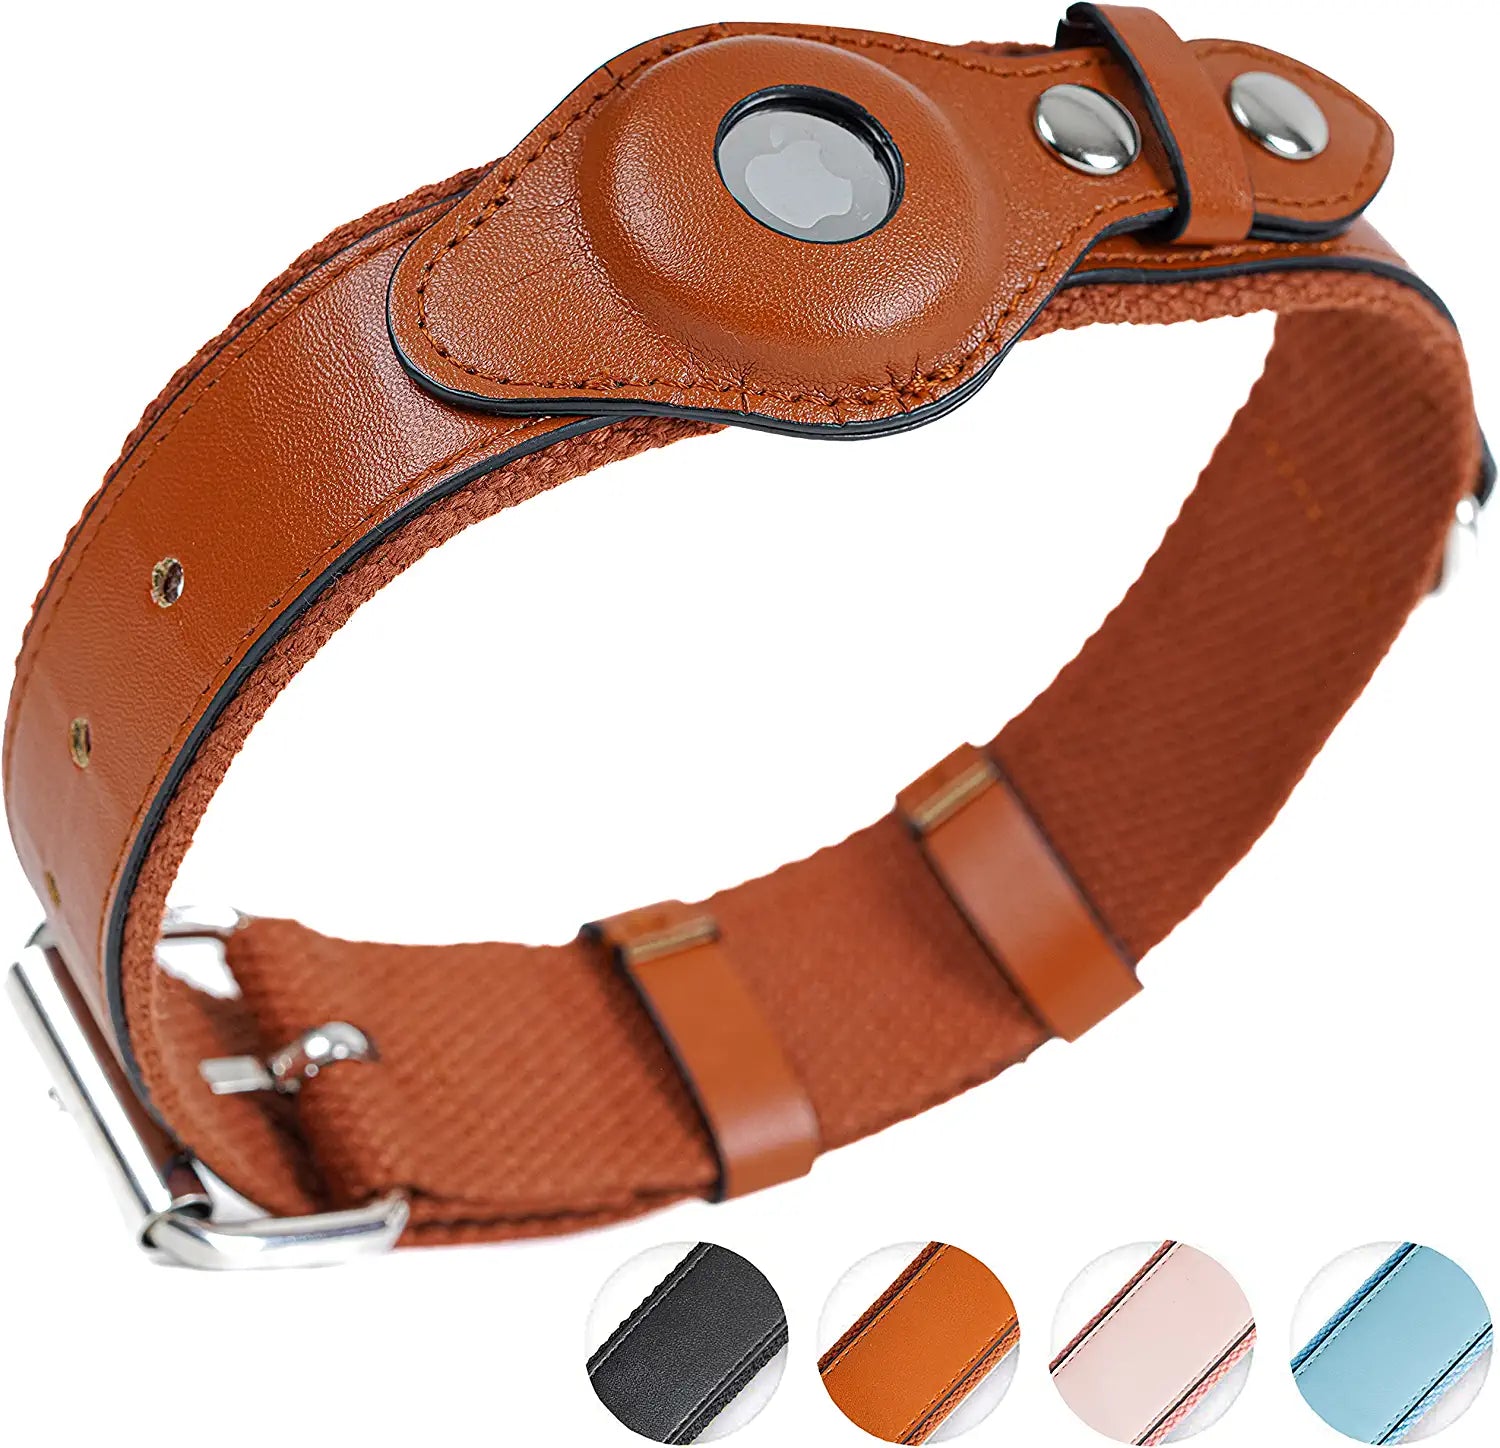 Safe Paws Airtag Dog Collar Holder - Our Adjustable Air Tag Dog Collar Holder Fits Small Medium and Large Dogs - Use Our Elegant PU Leather Dog Airtag Collar to Quickly Locate Your Dog Electronics > GPS Accessories > GPS Cases Safe Paws Brown Large 